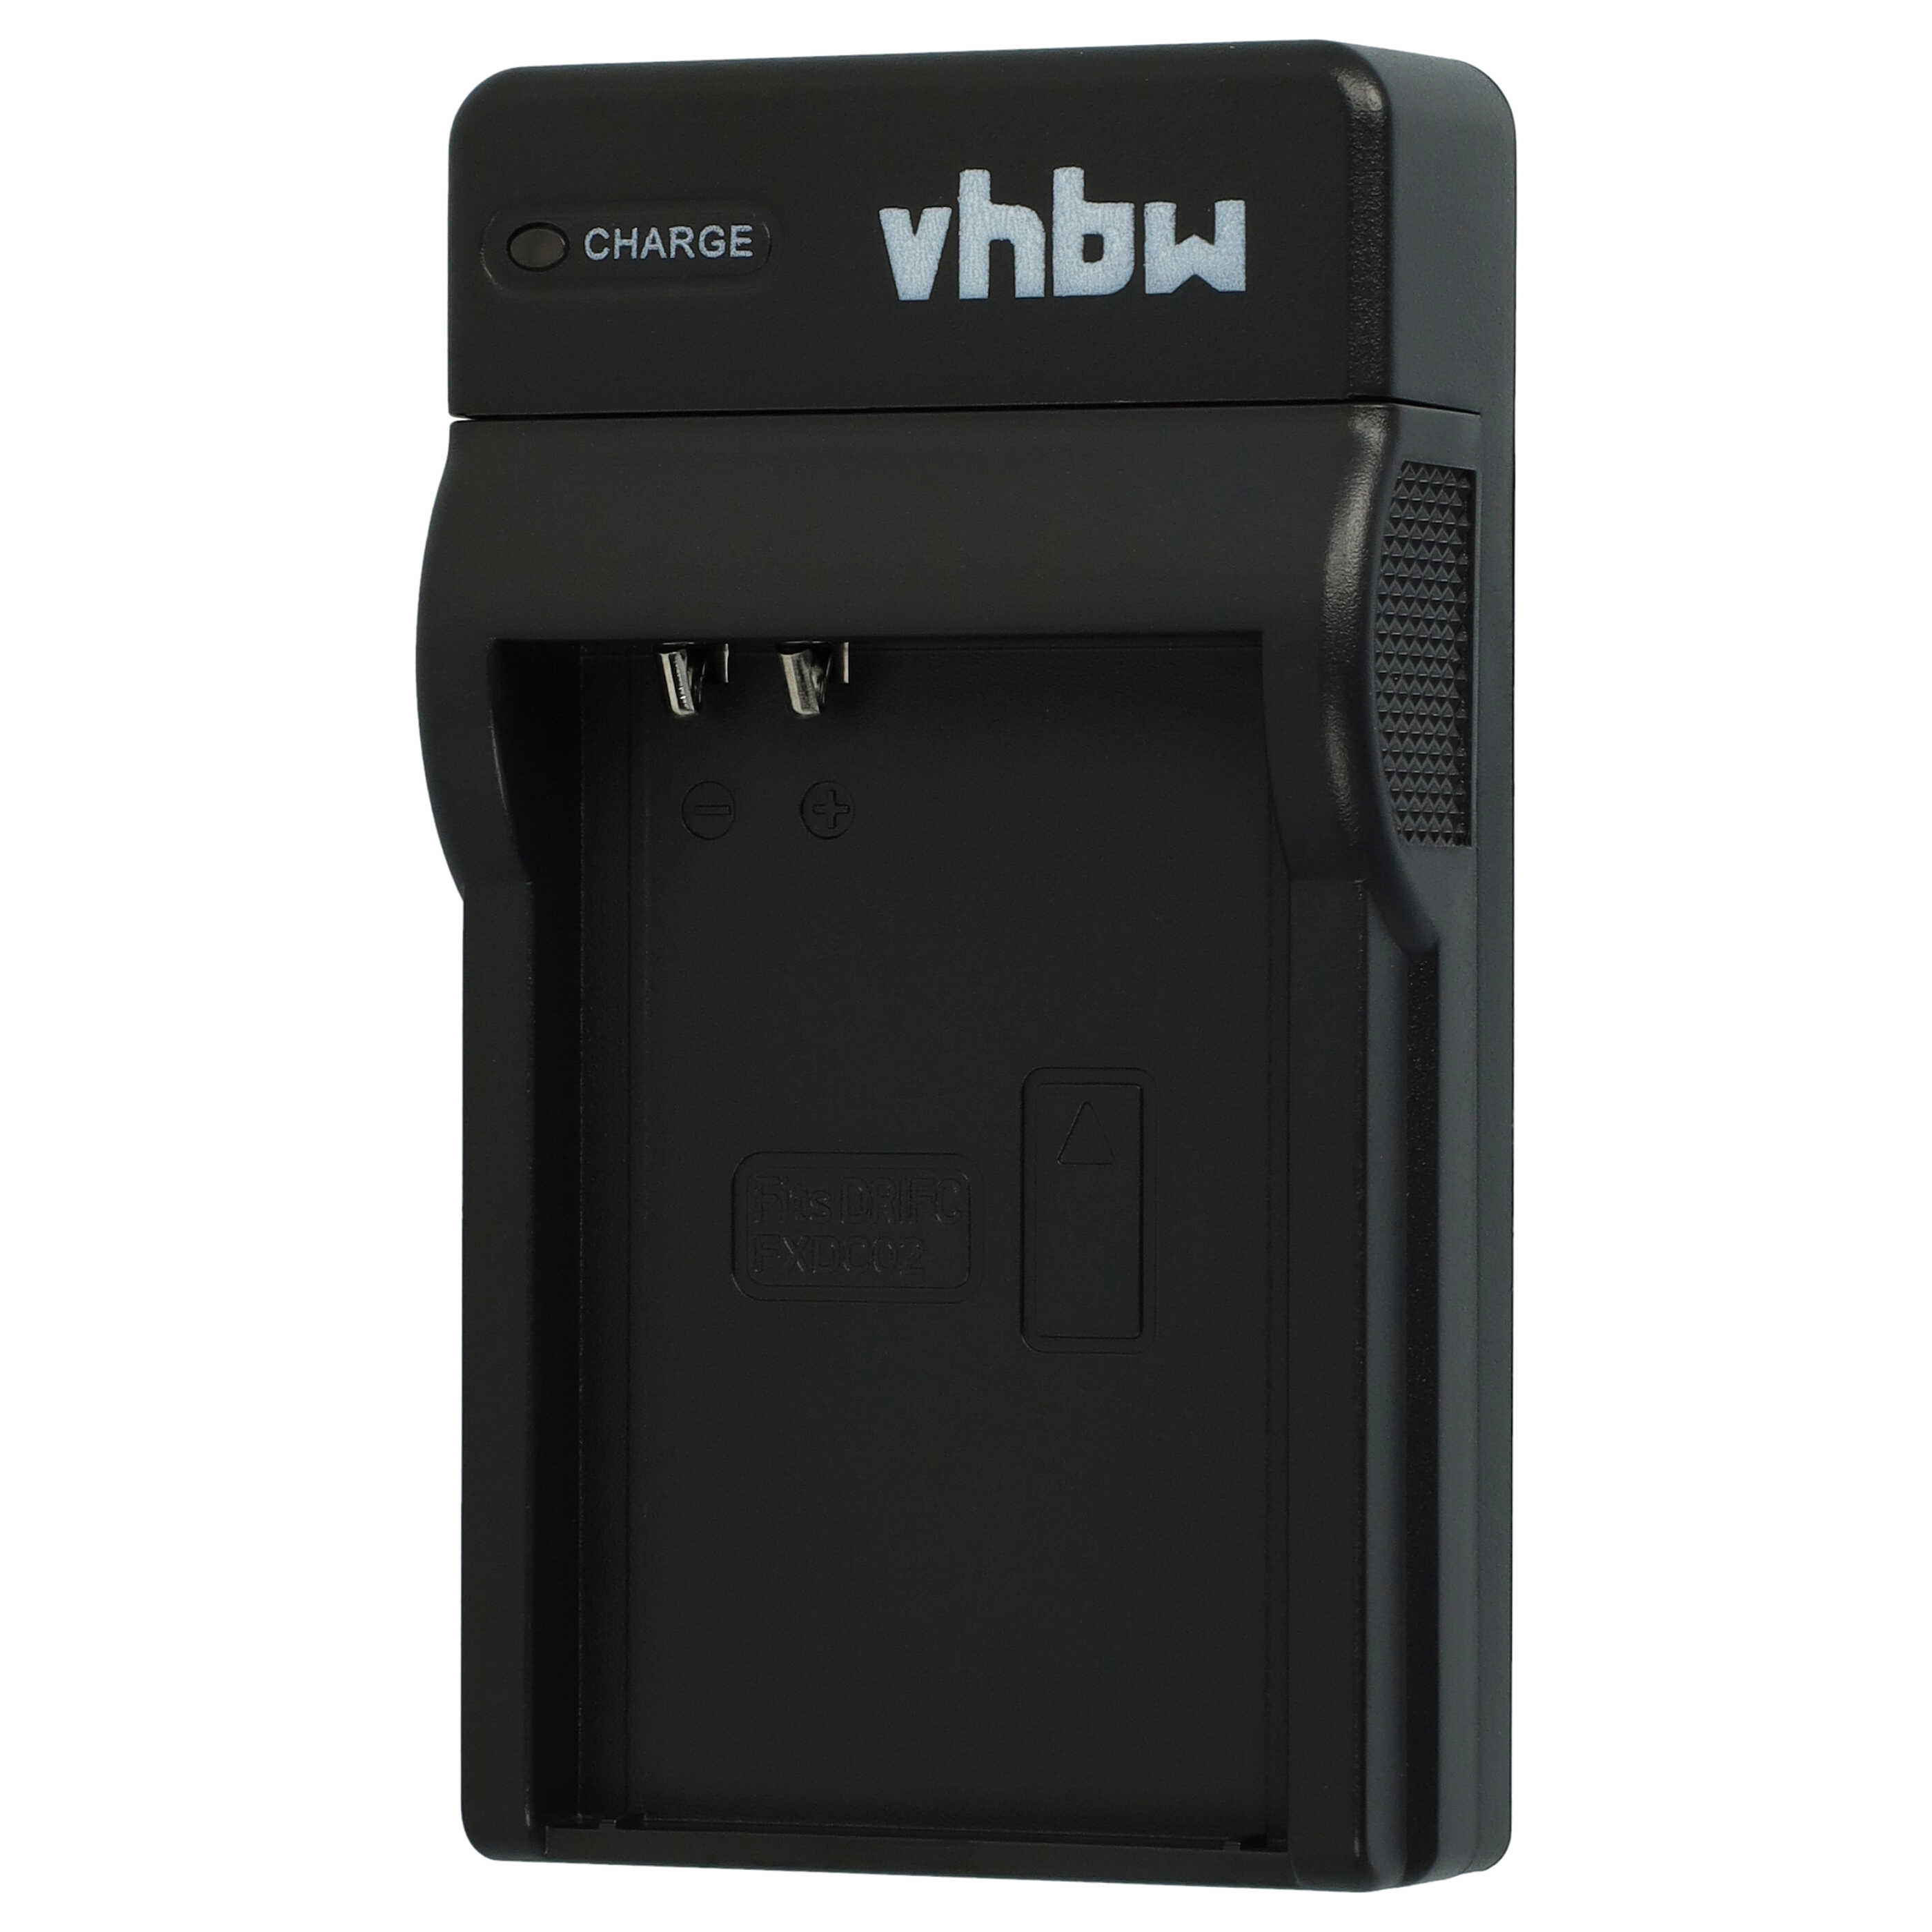 Chargeur pour appareil photo Innovation Ghost S 